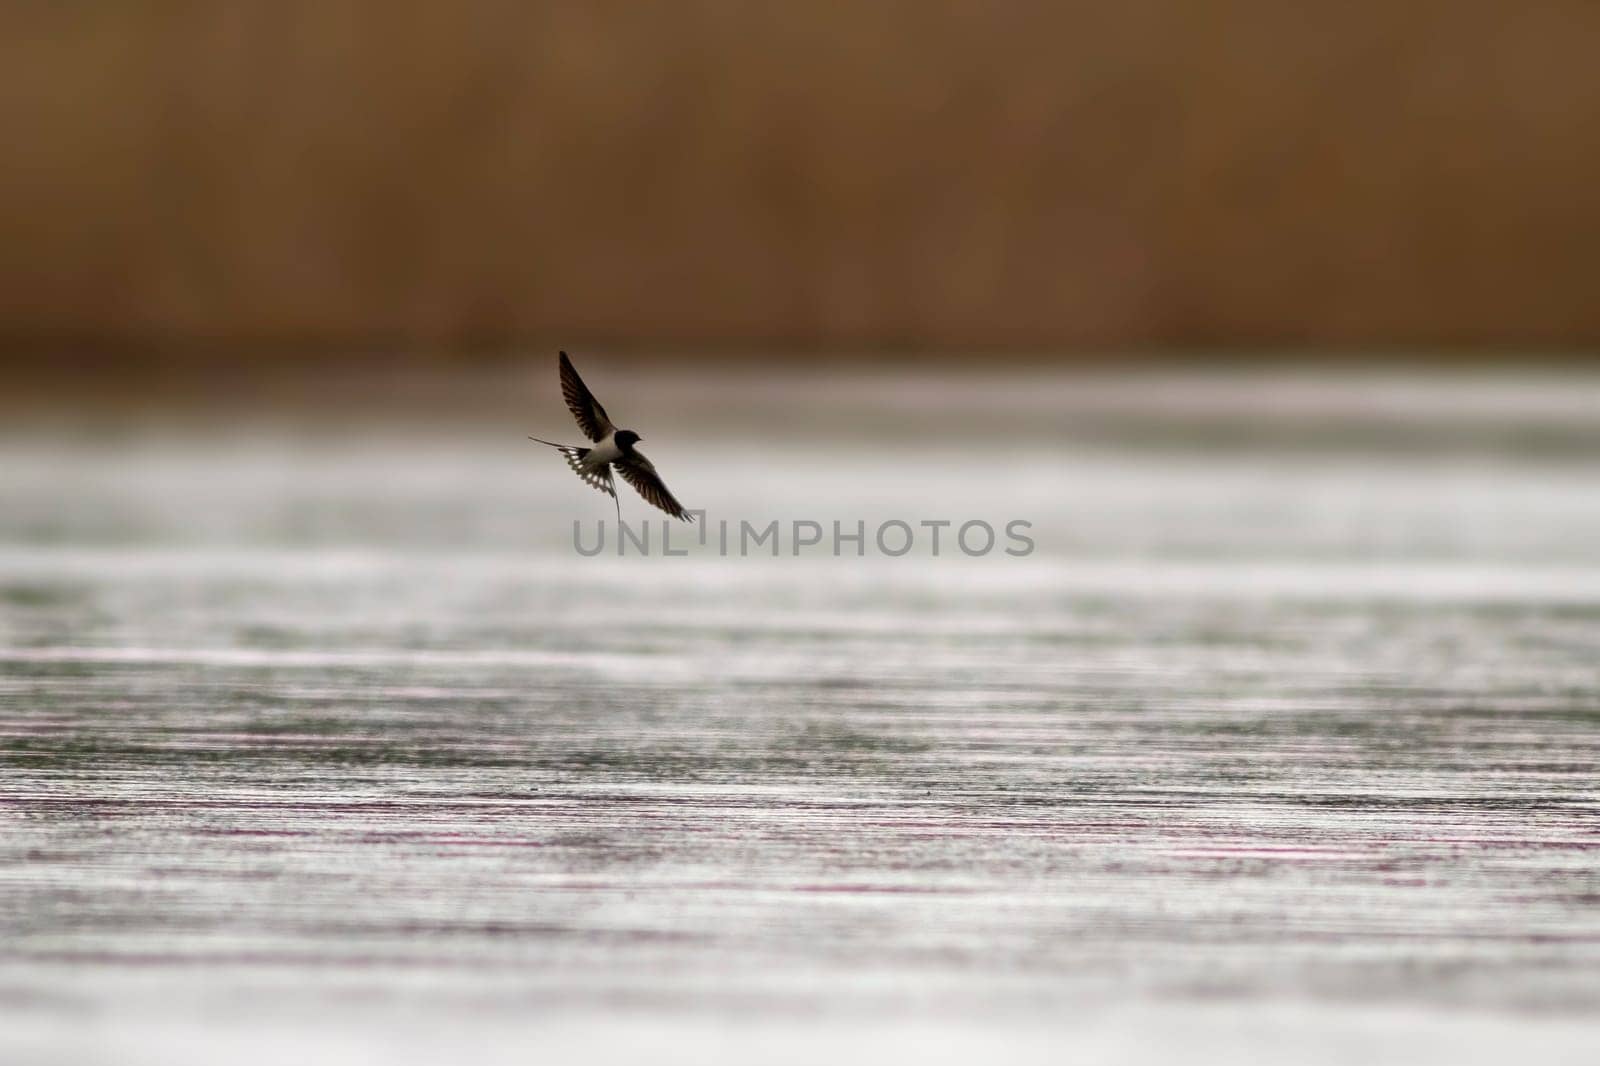 one barn swallow (Hirundo rustica) flies over a lake in search of insects by mario_plechaty_photography